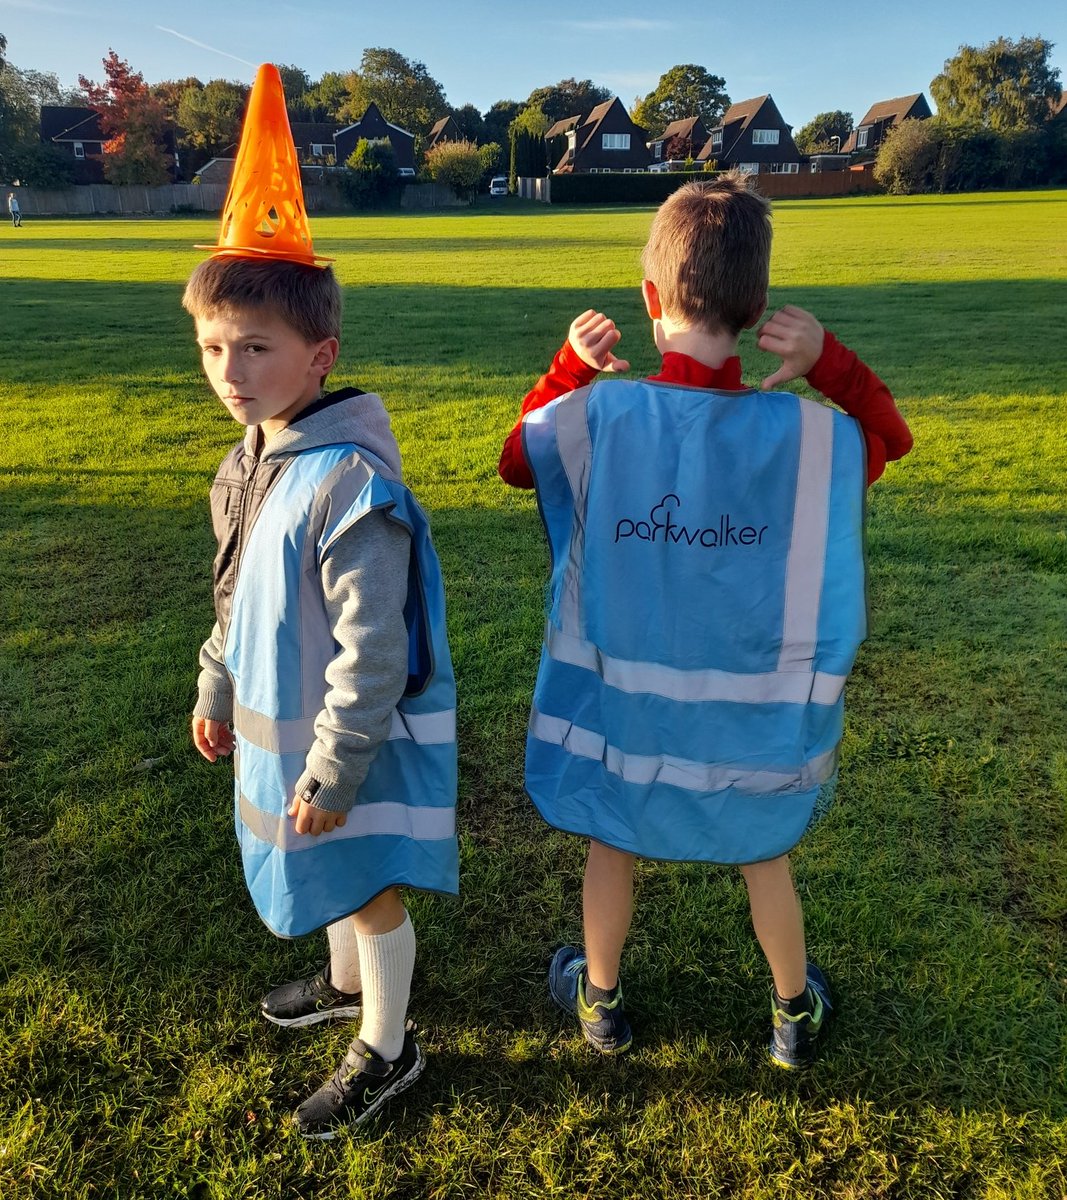 Who was at junior parkrun today and was it to #parkwalk? 🌳 #loveparkrun